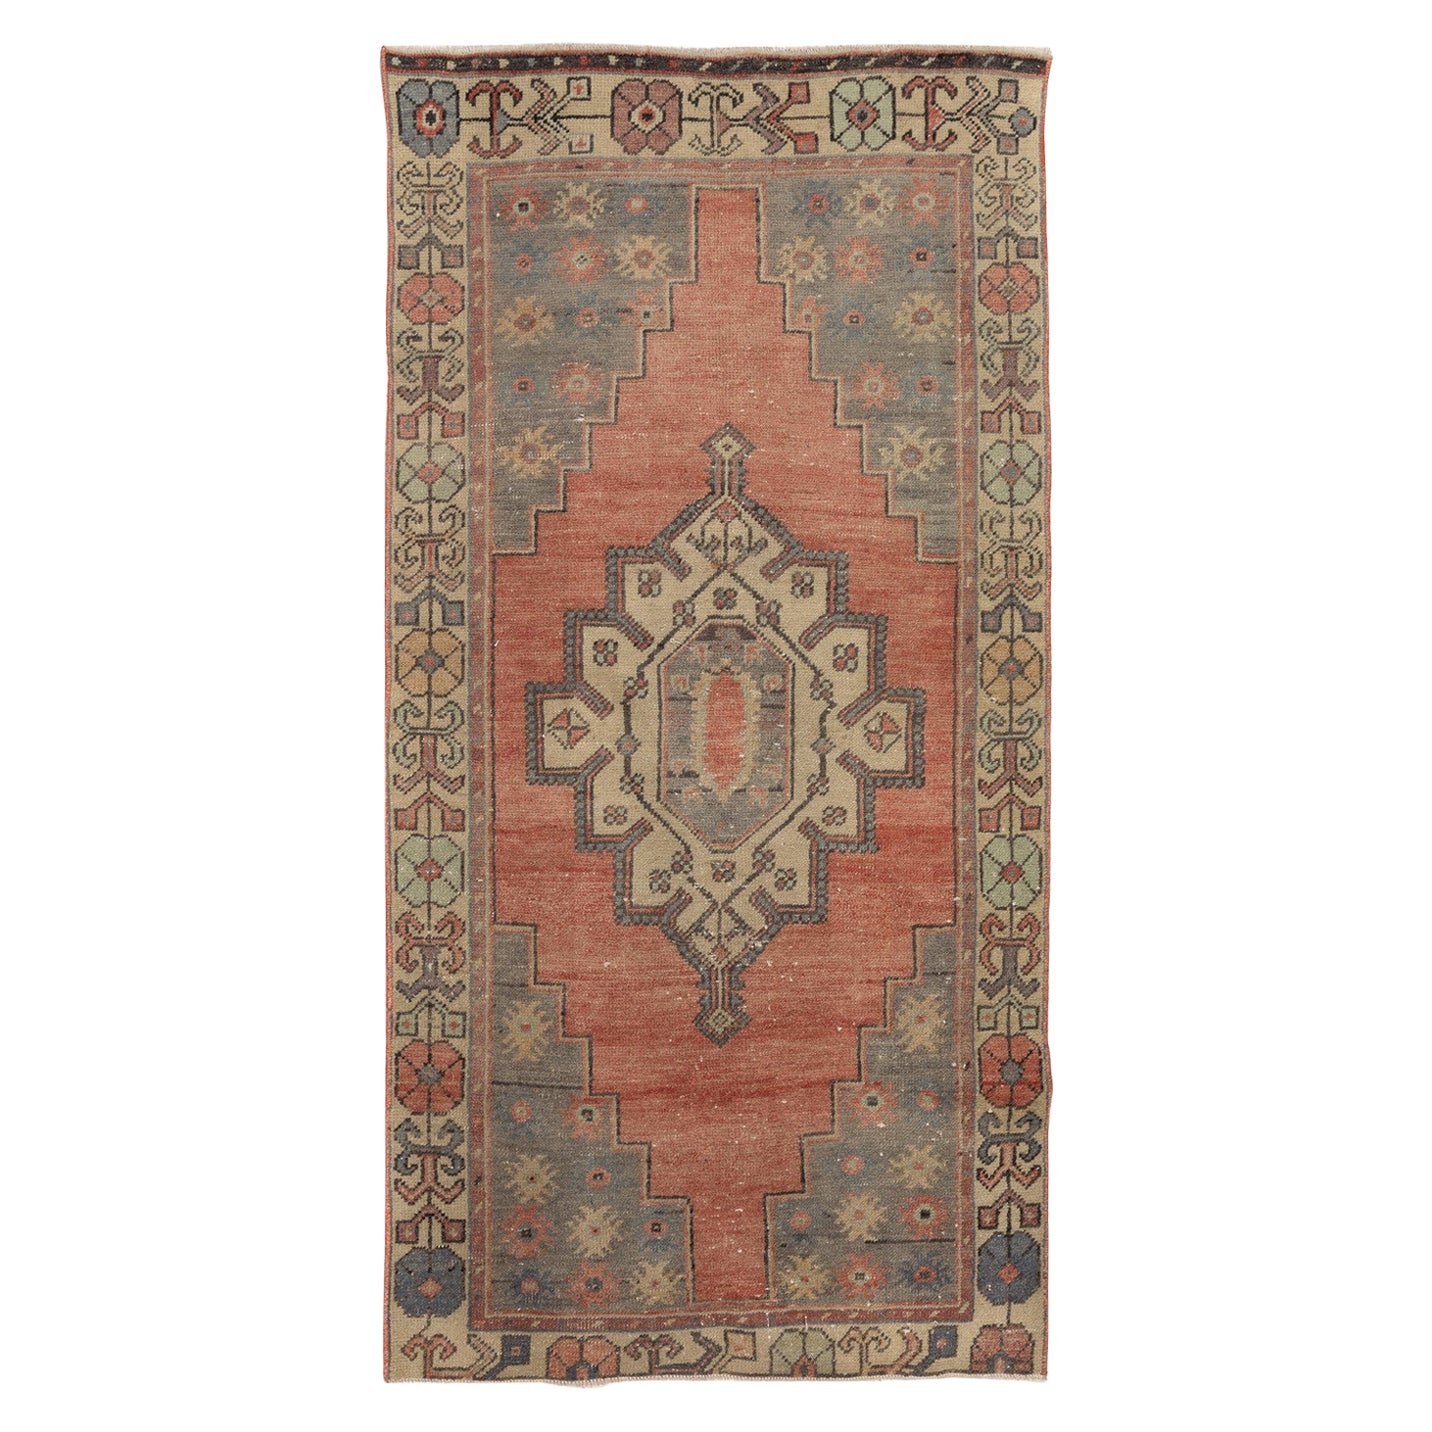 3.2x6 Ft Vintage Tribal throw Rug. Soft Wool and Natural Colors. Turkish Carpet For Sale